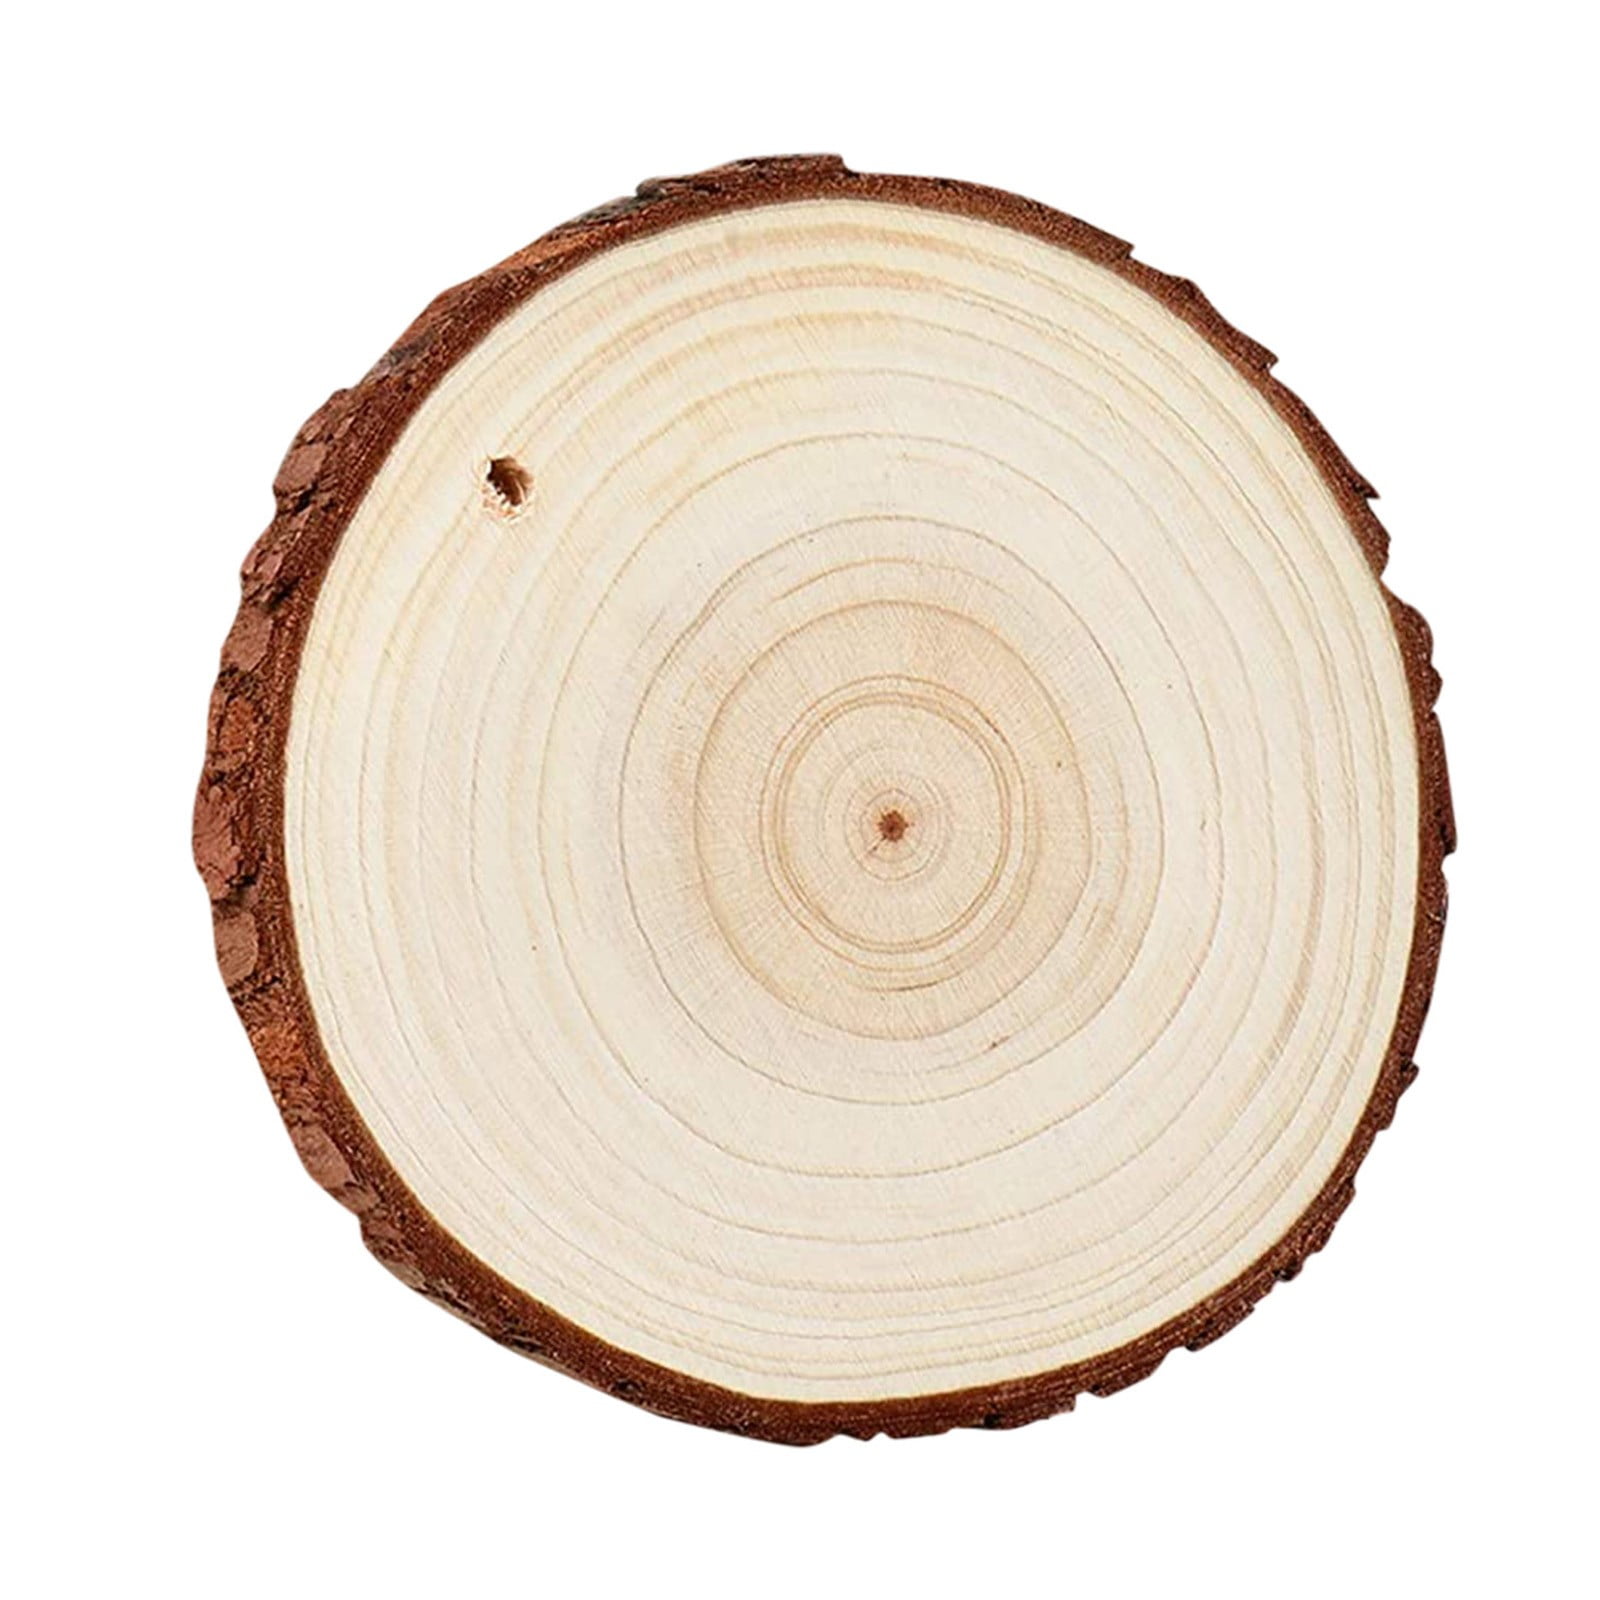 10pcs Natural Wood Wood Slice Kit 2.0-2.45 Pre-drill Wood Circles For  Crafts, Christmas Wood Slices For Crafts Round Wooden Discs For DIY Wood  Orna